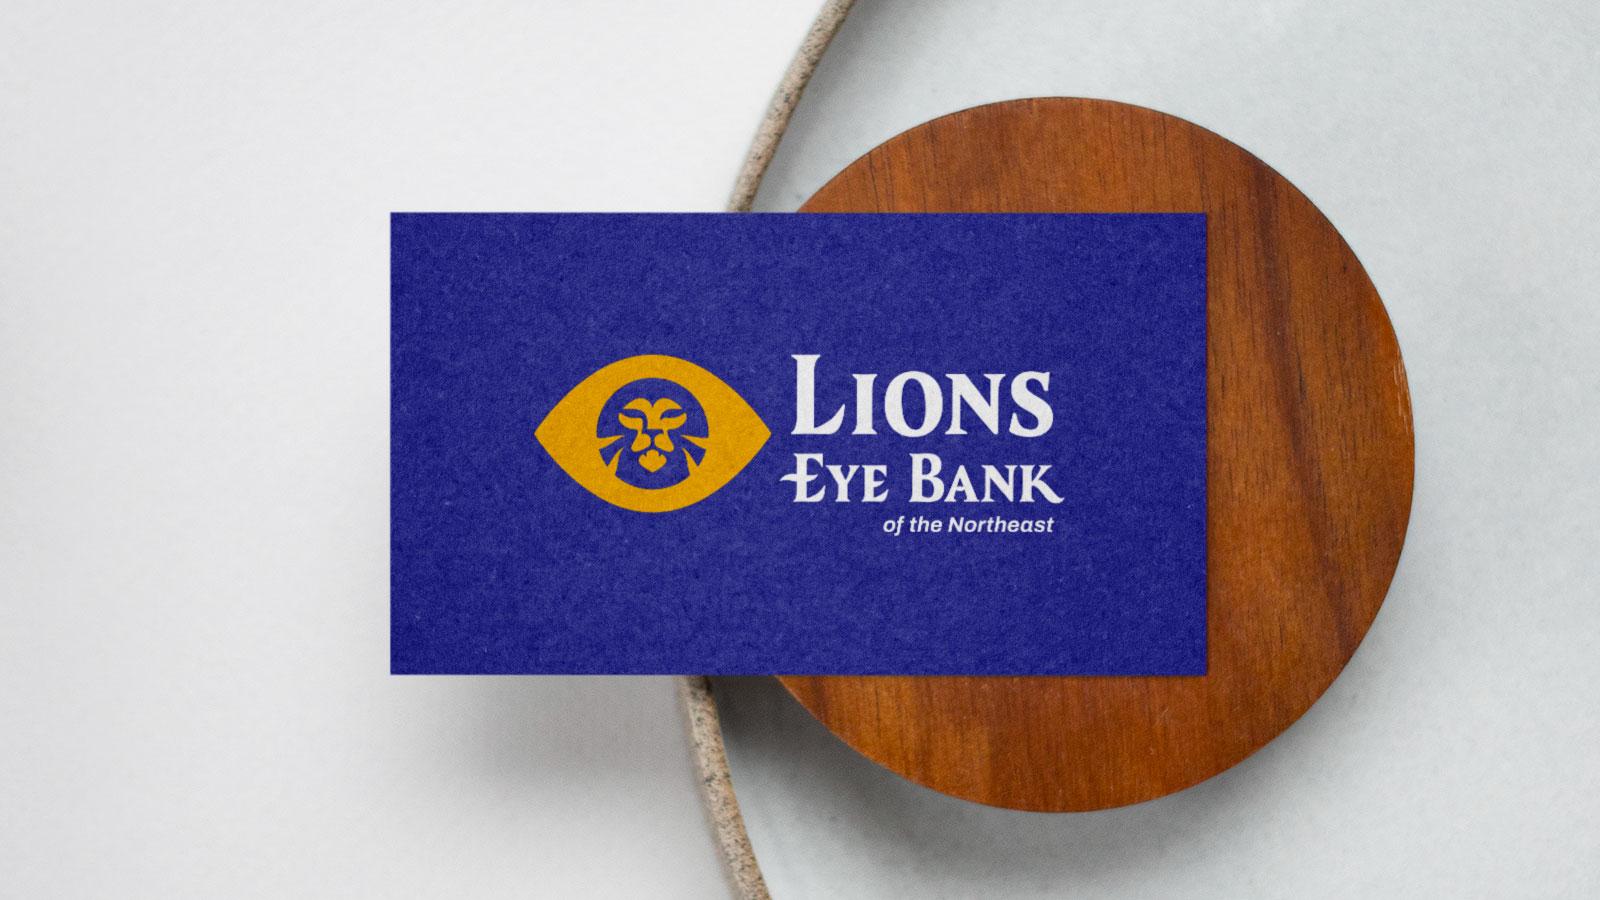 Lions Eye Bank of the Northeast | logo on Card